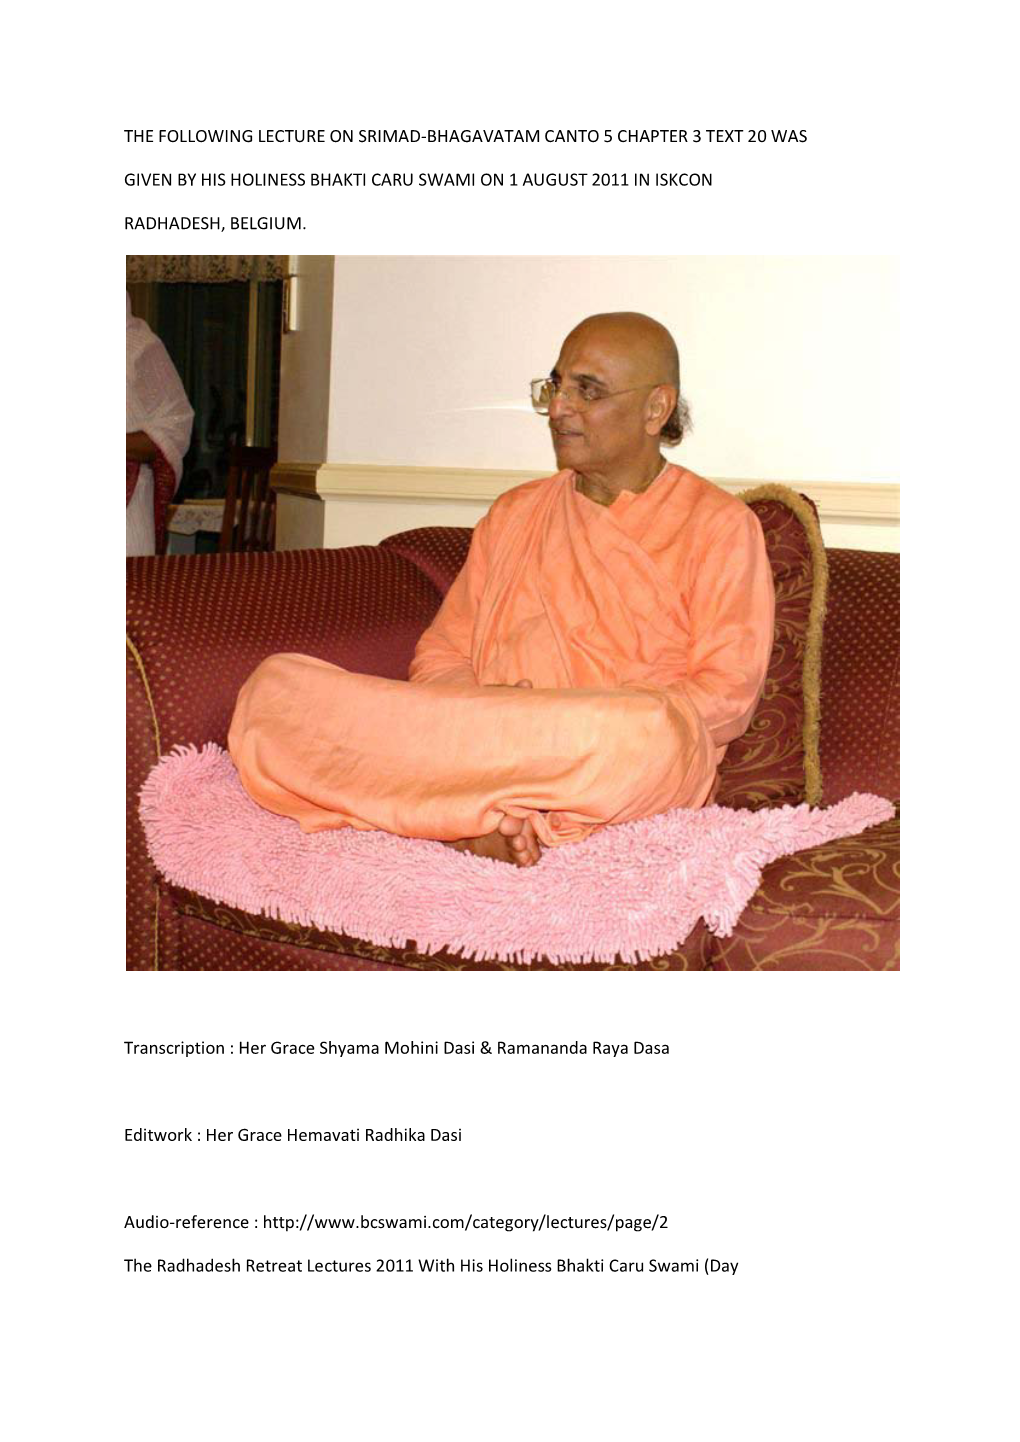 The Following Lecture on Srimad-Bhagavatam Canto 5 Chapter 3 Text 20 Was